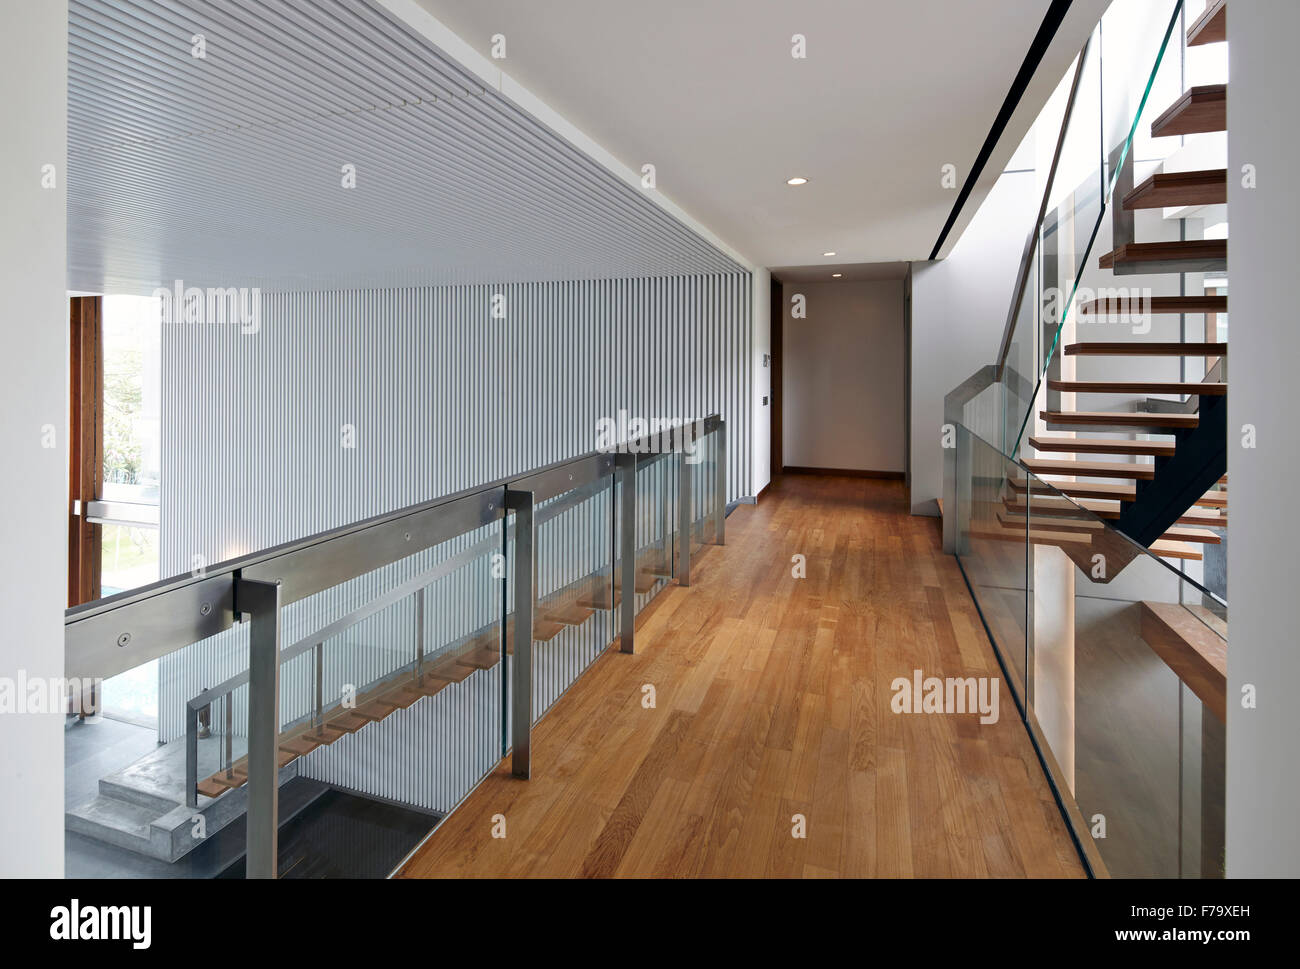 Stairway and elevated walkway landing of a house in Cove Way, Sentosa, Singapore designed by Robert Greg Shand Architects Stock Photo